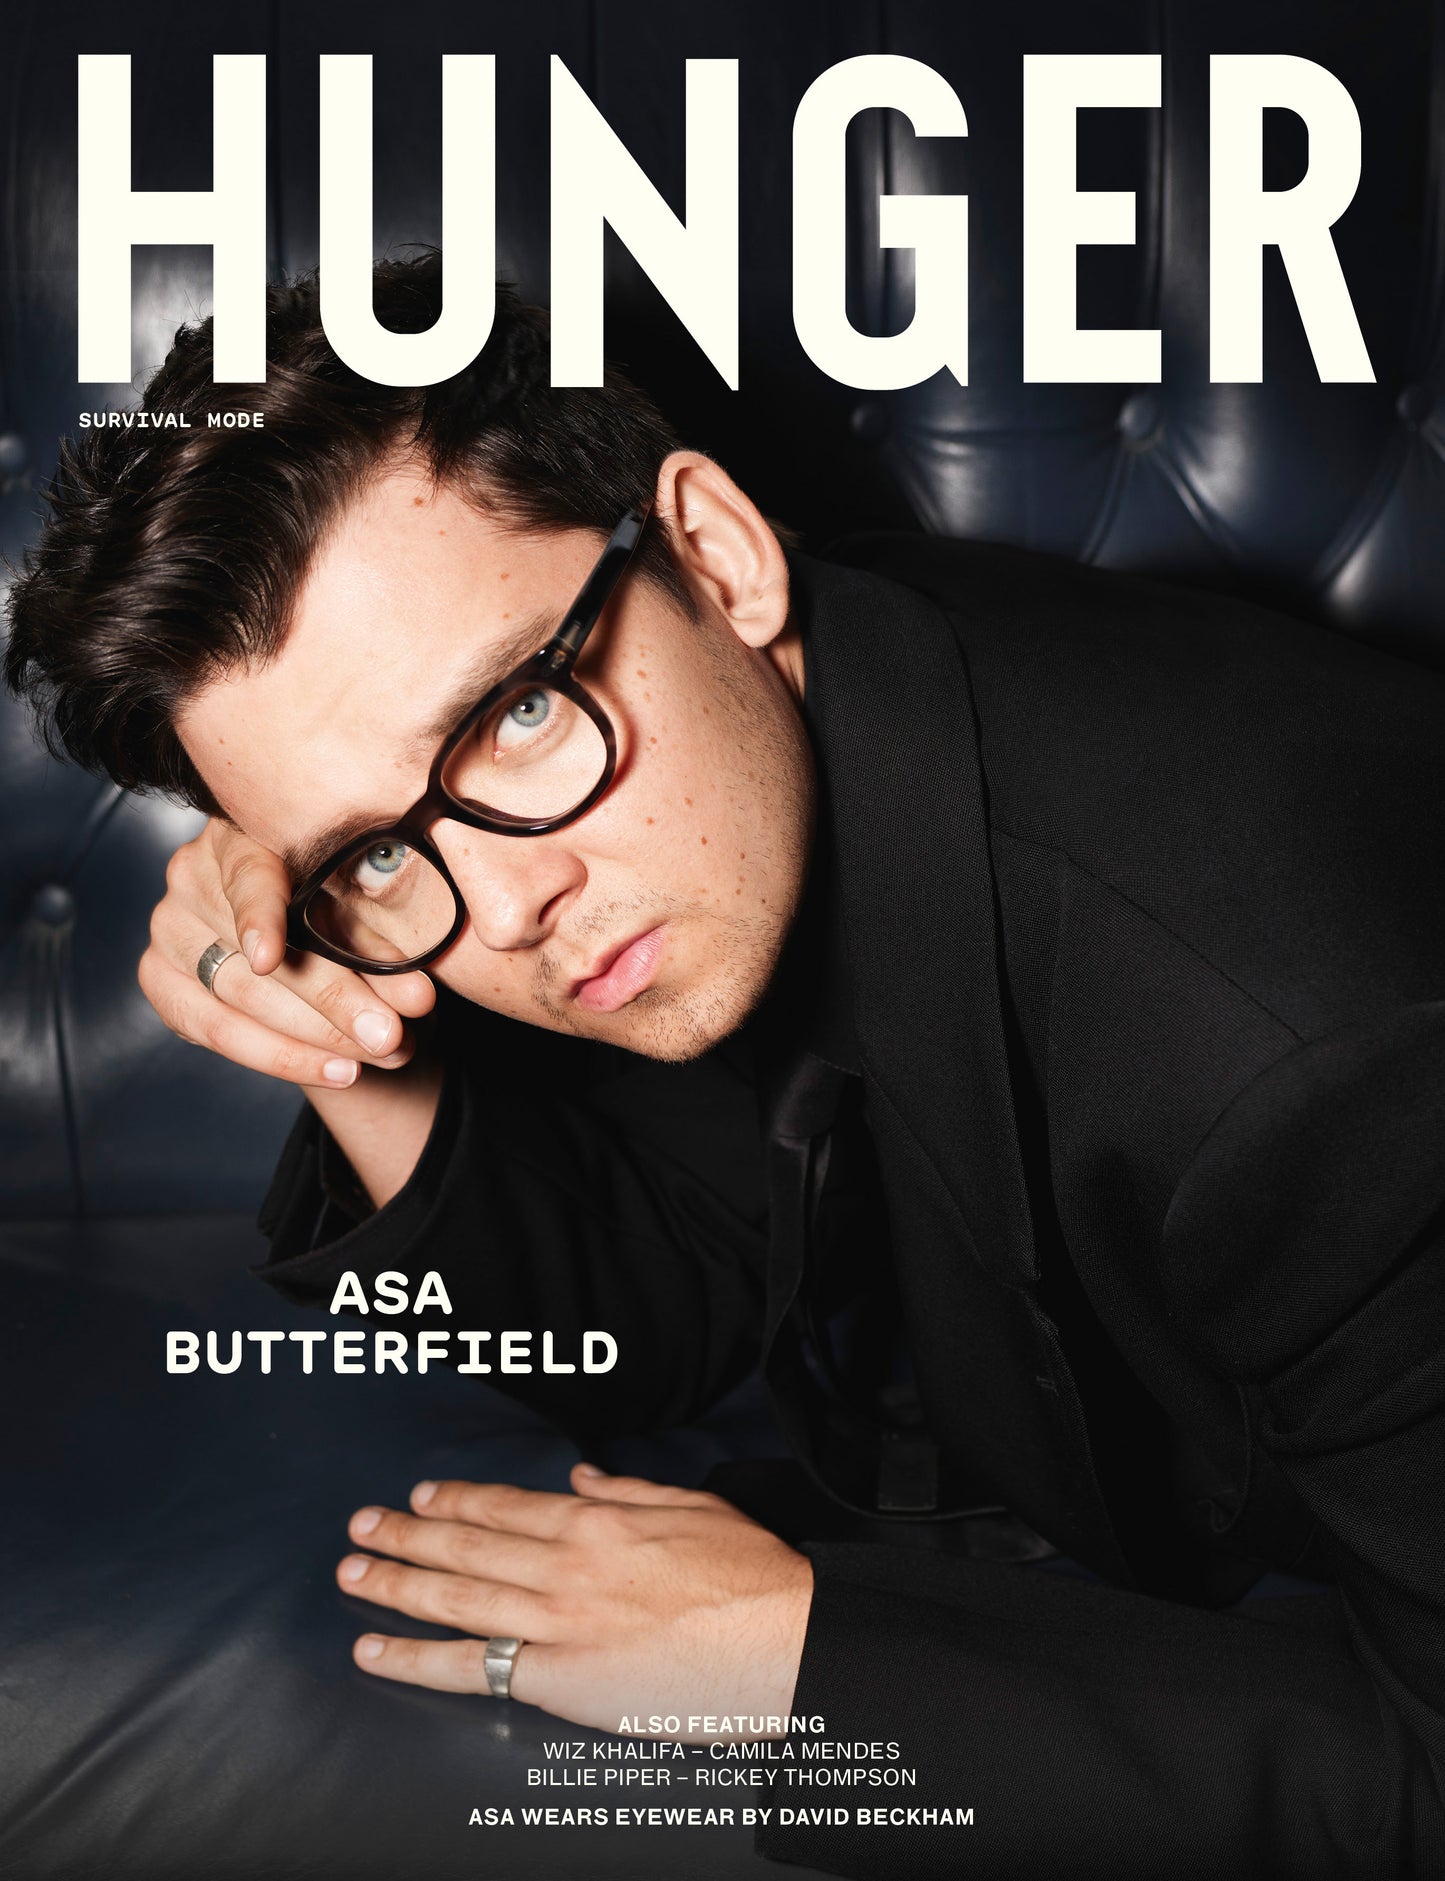 Asa Butterfield covers the Survival Mode issue in Eyewear by David Beckham